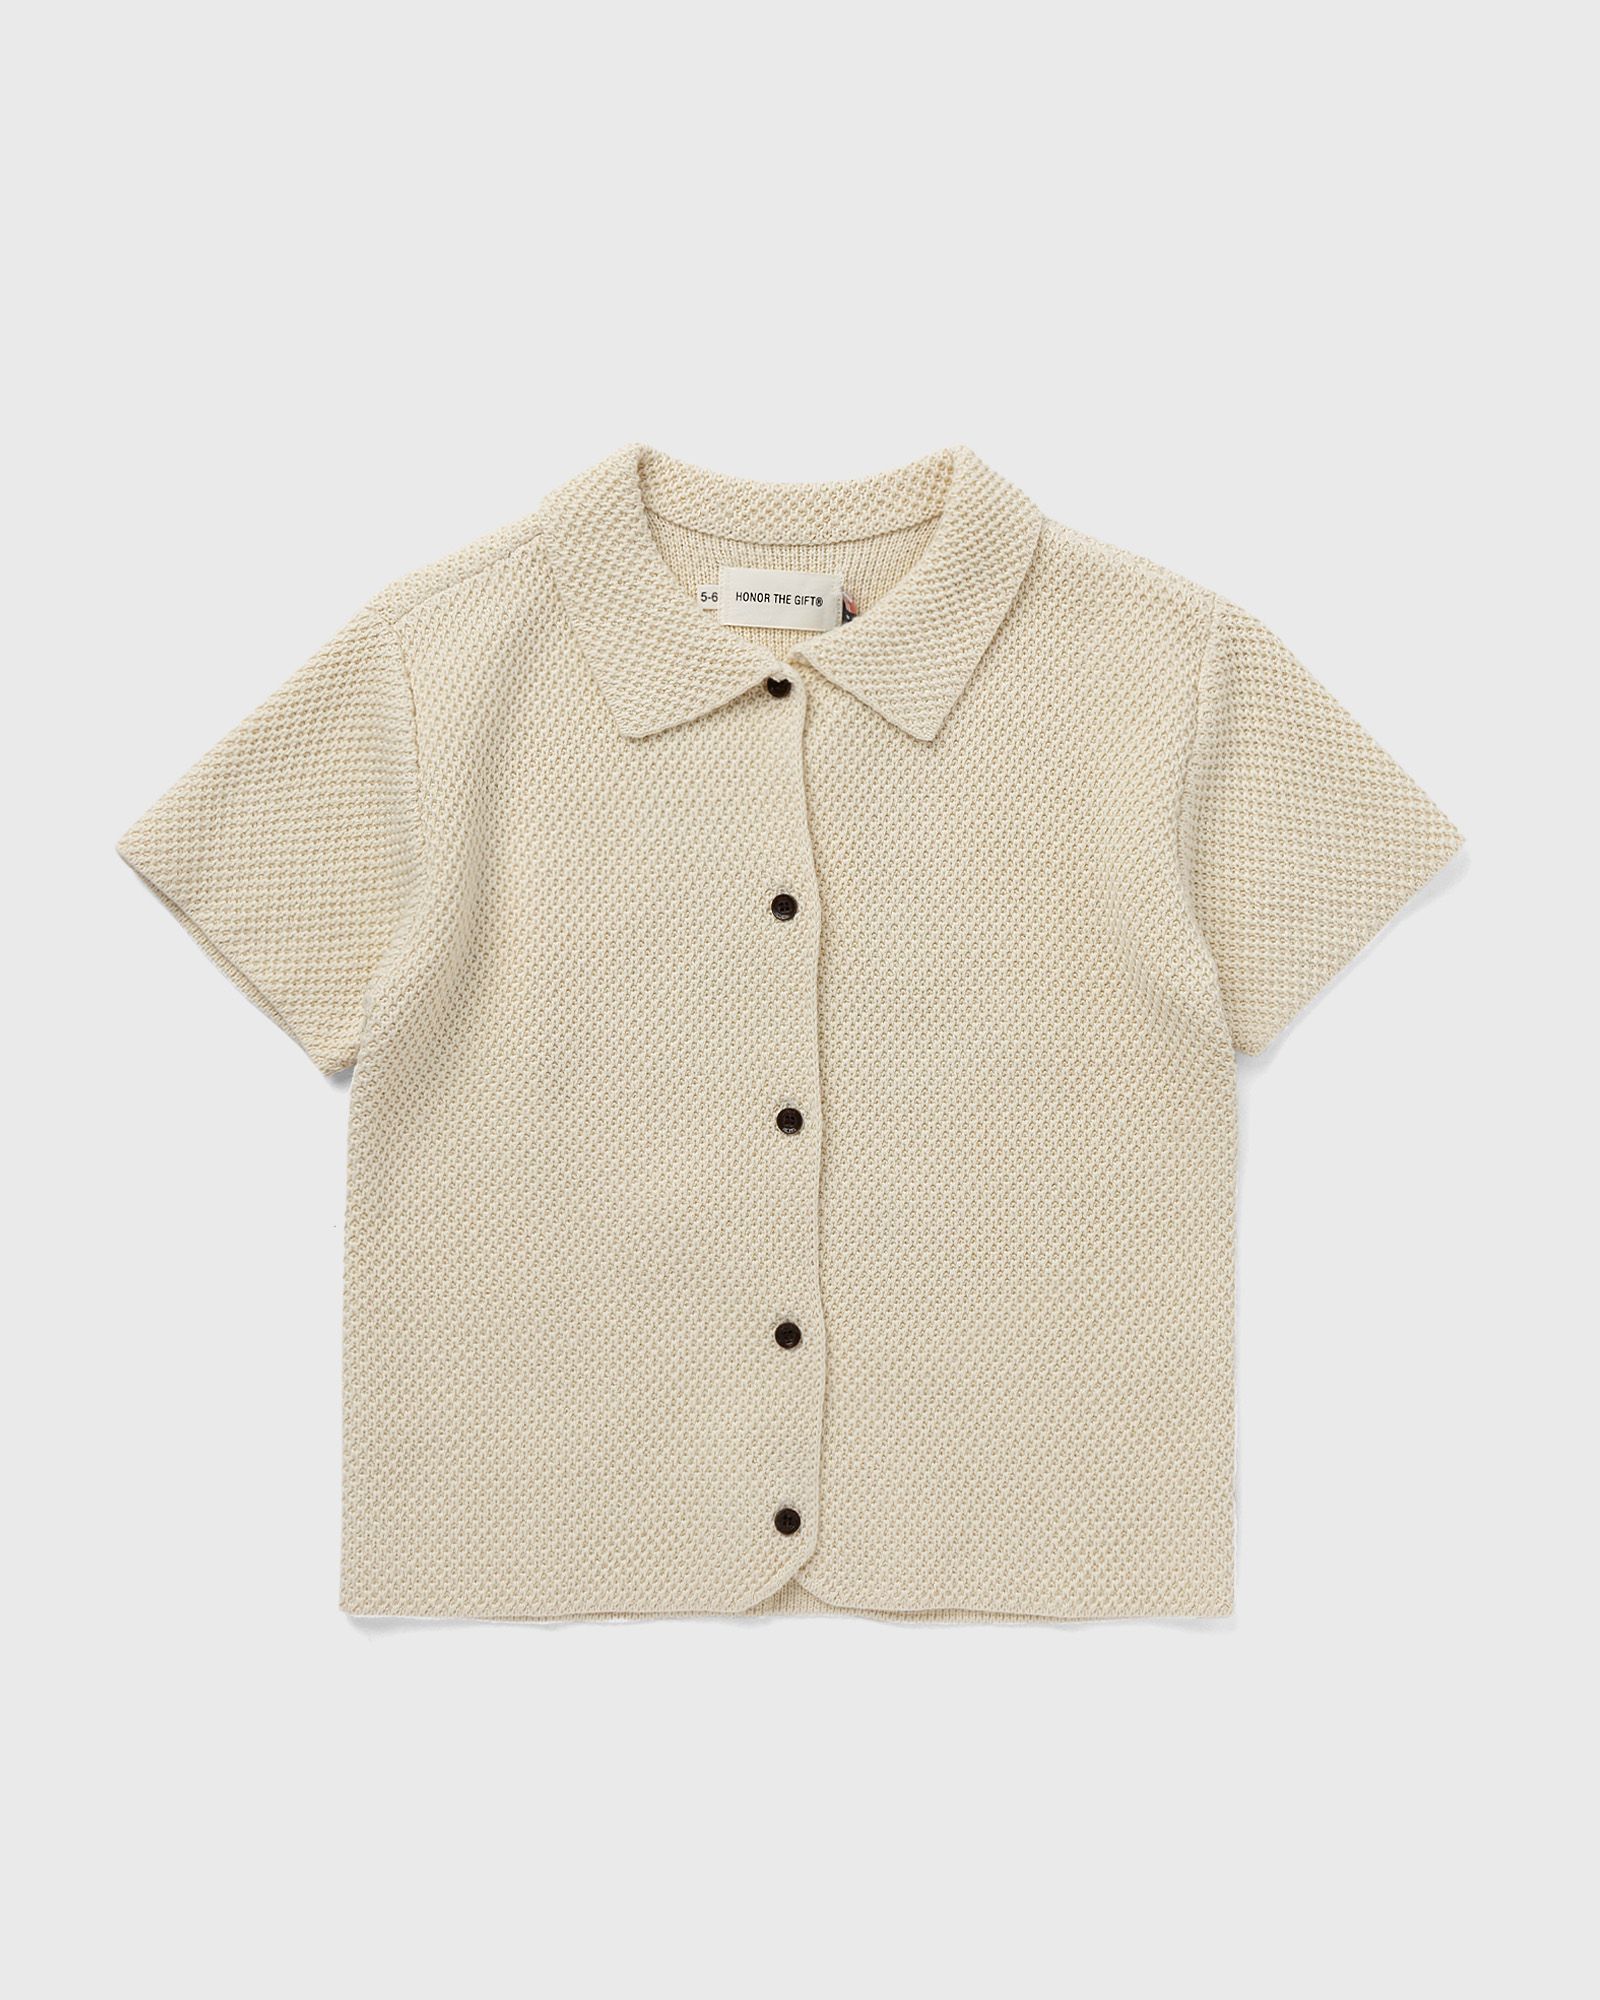 Honor The Gift - knit h button up  shirts white in größe:age 2-4 | eu 92-104